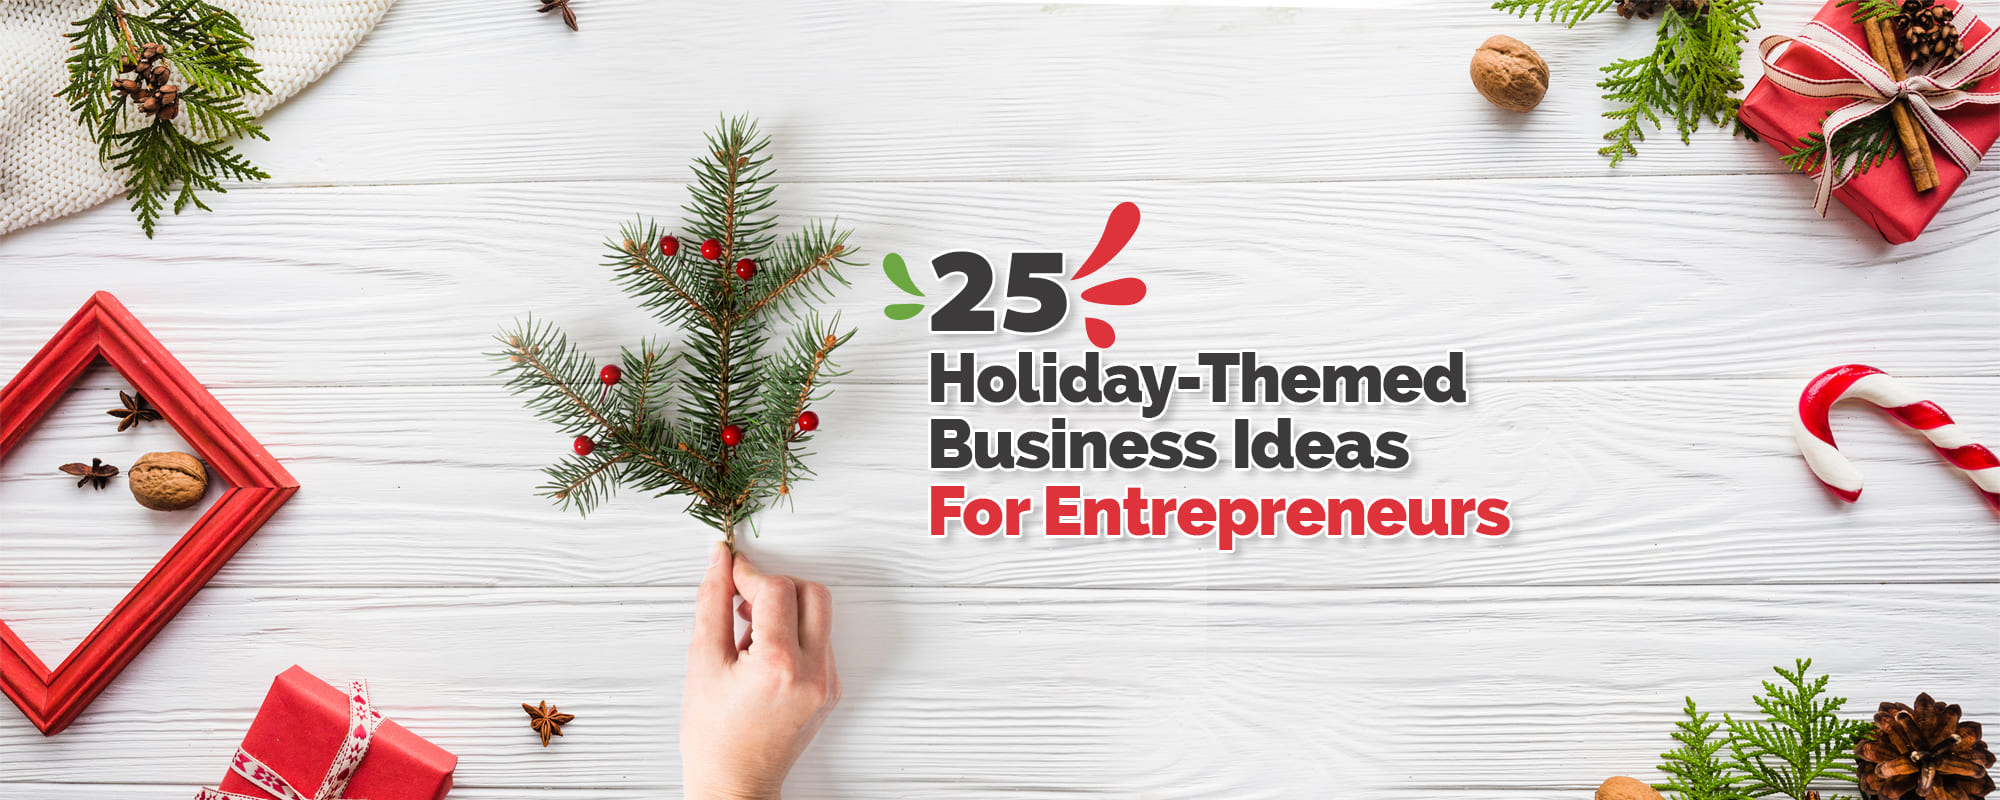 Winter is Coming: Holiday-themed Business Ideas for Entrepreneurs